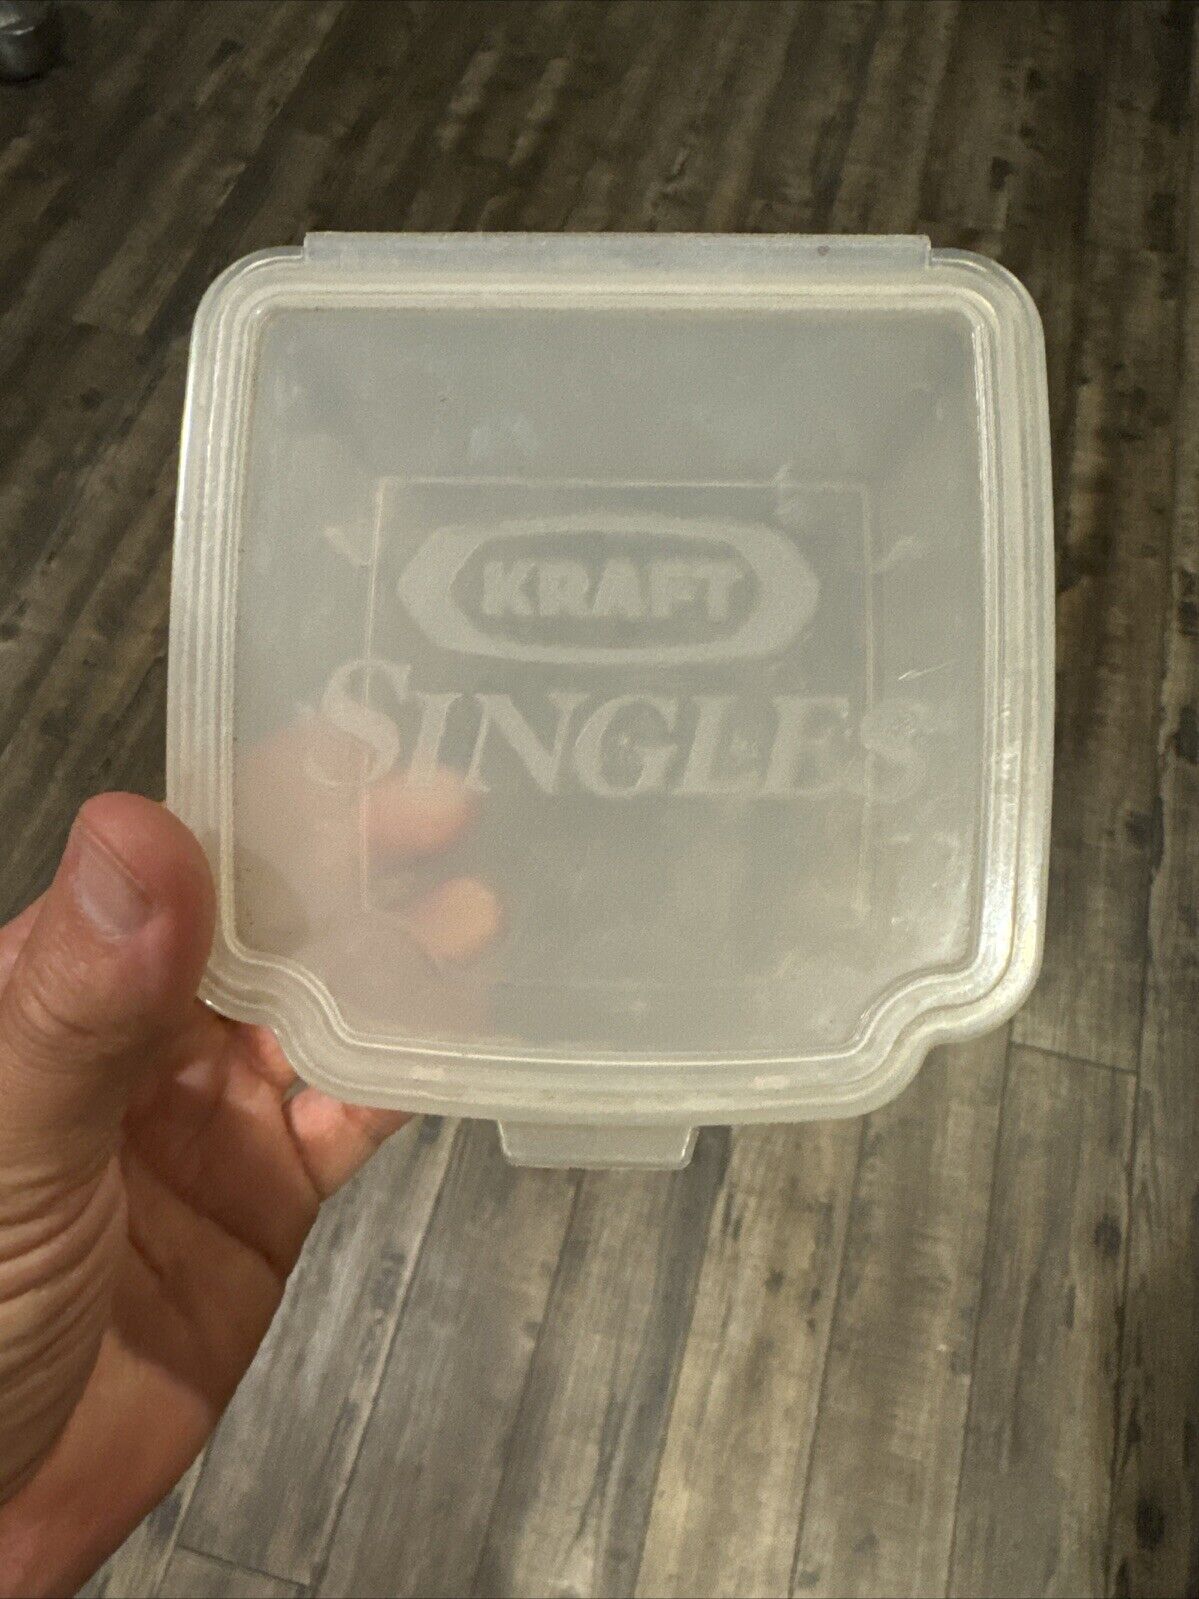 Vintage 1990s Kraft Cheese Singles Storage Container Clear Plastic Food Box